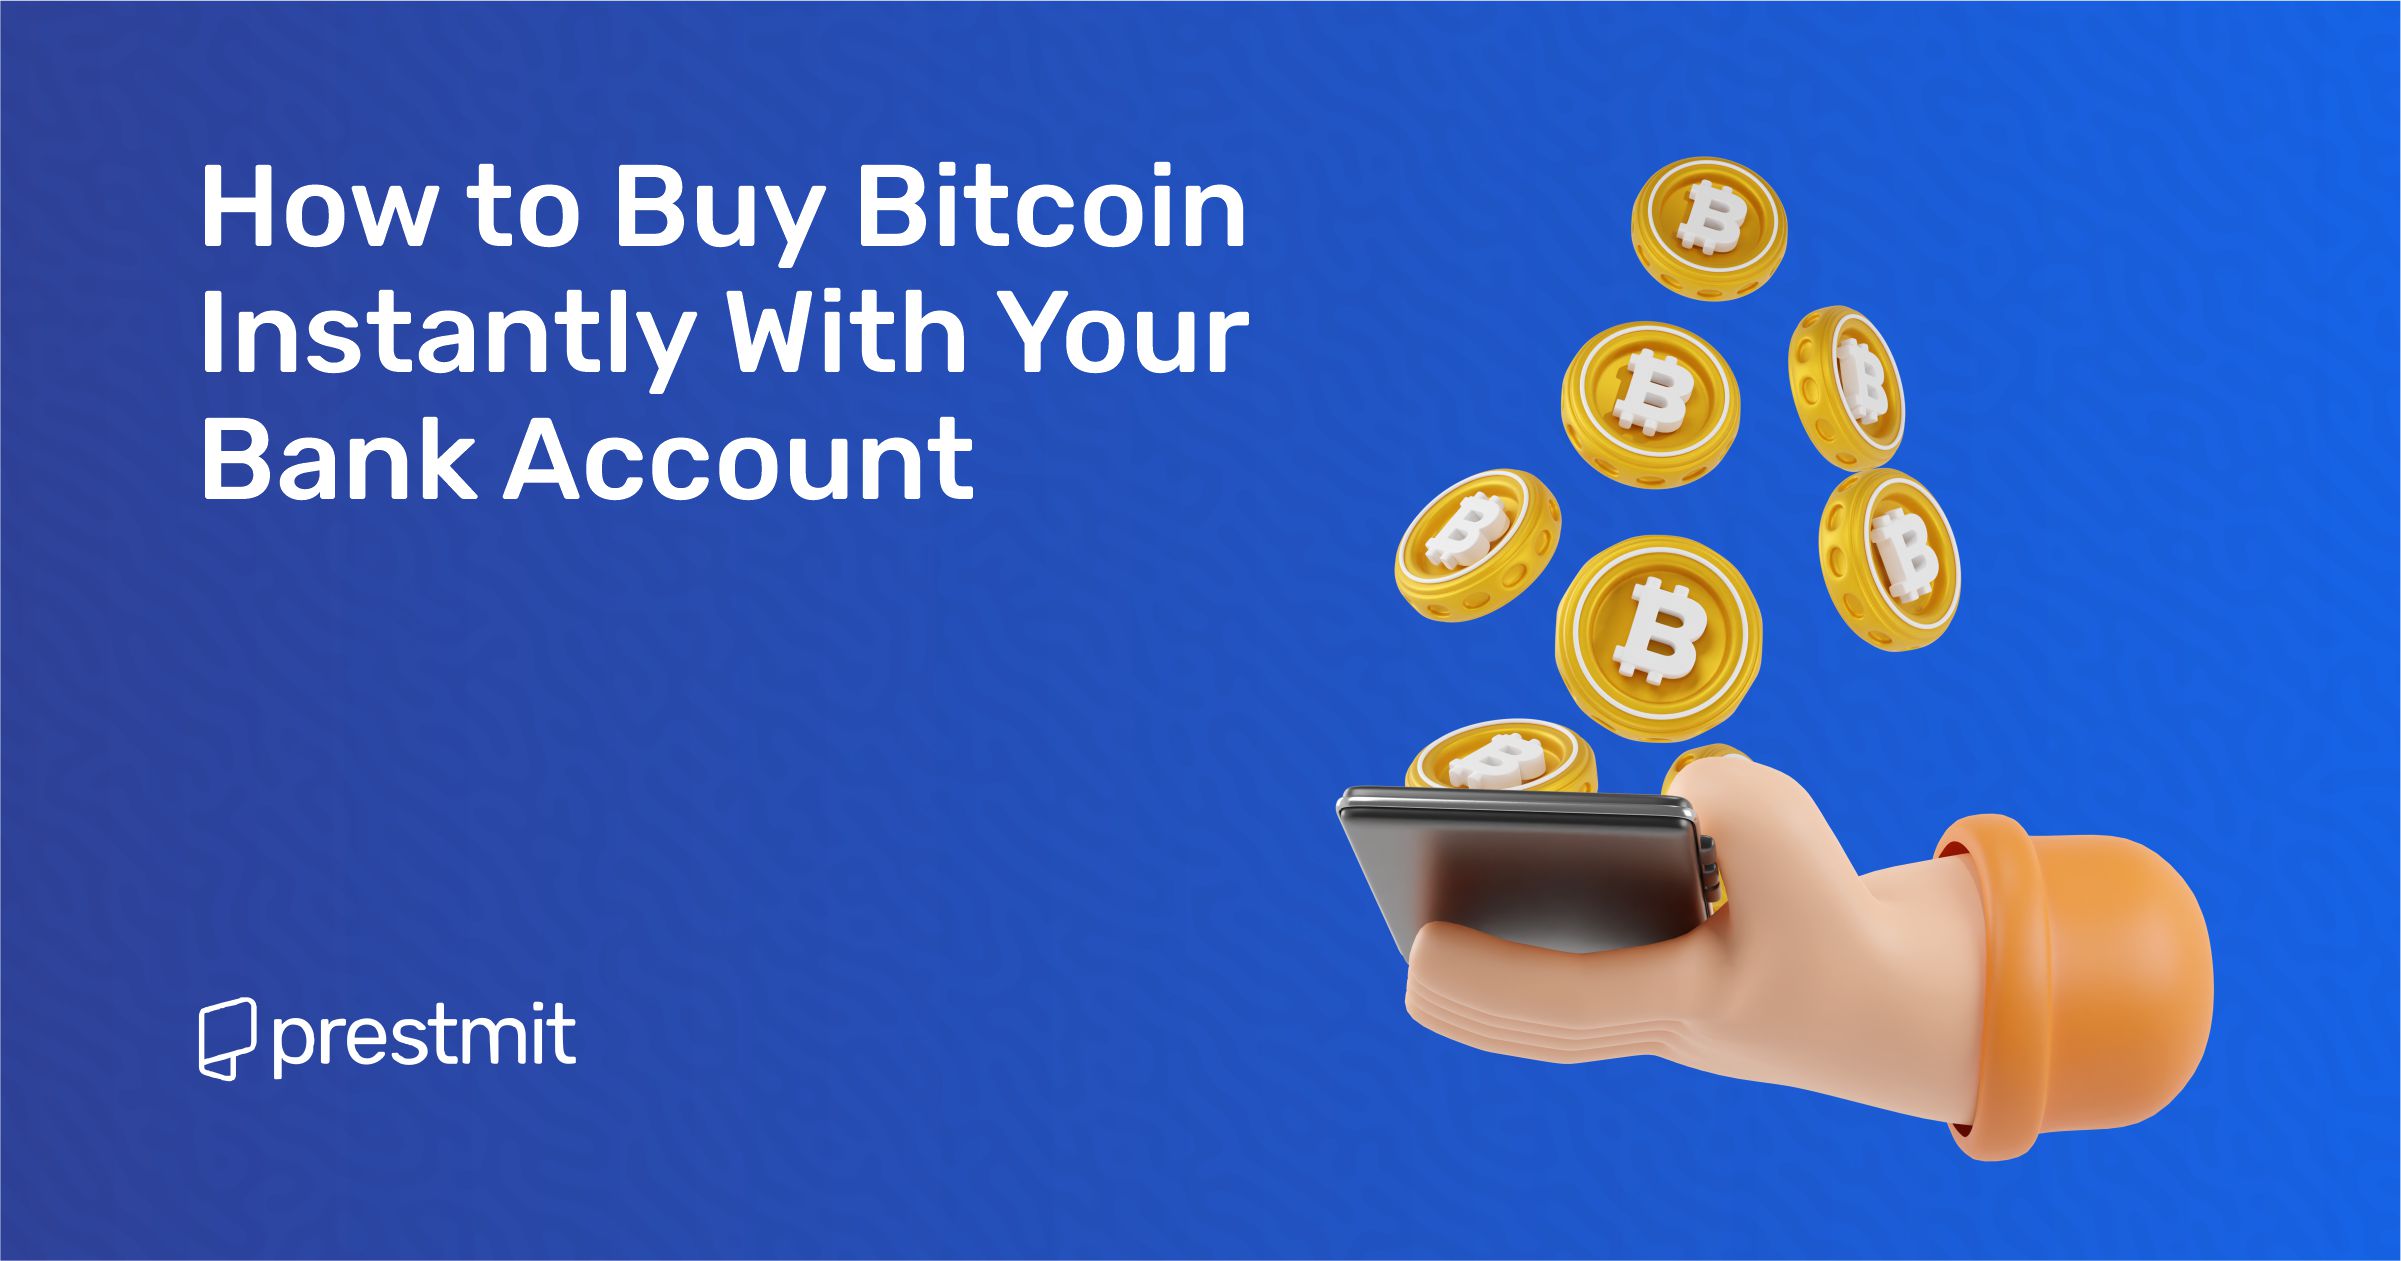 Once you have funds in your Circle account, you're ready to buy Bitcoin. Click on the 